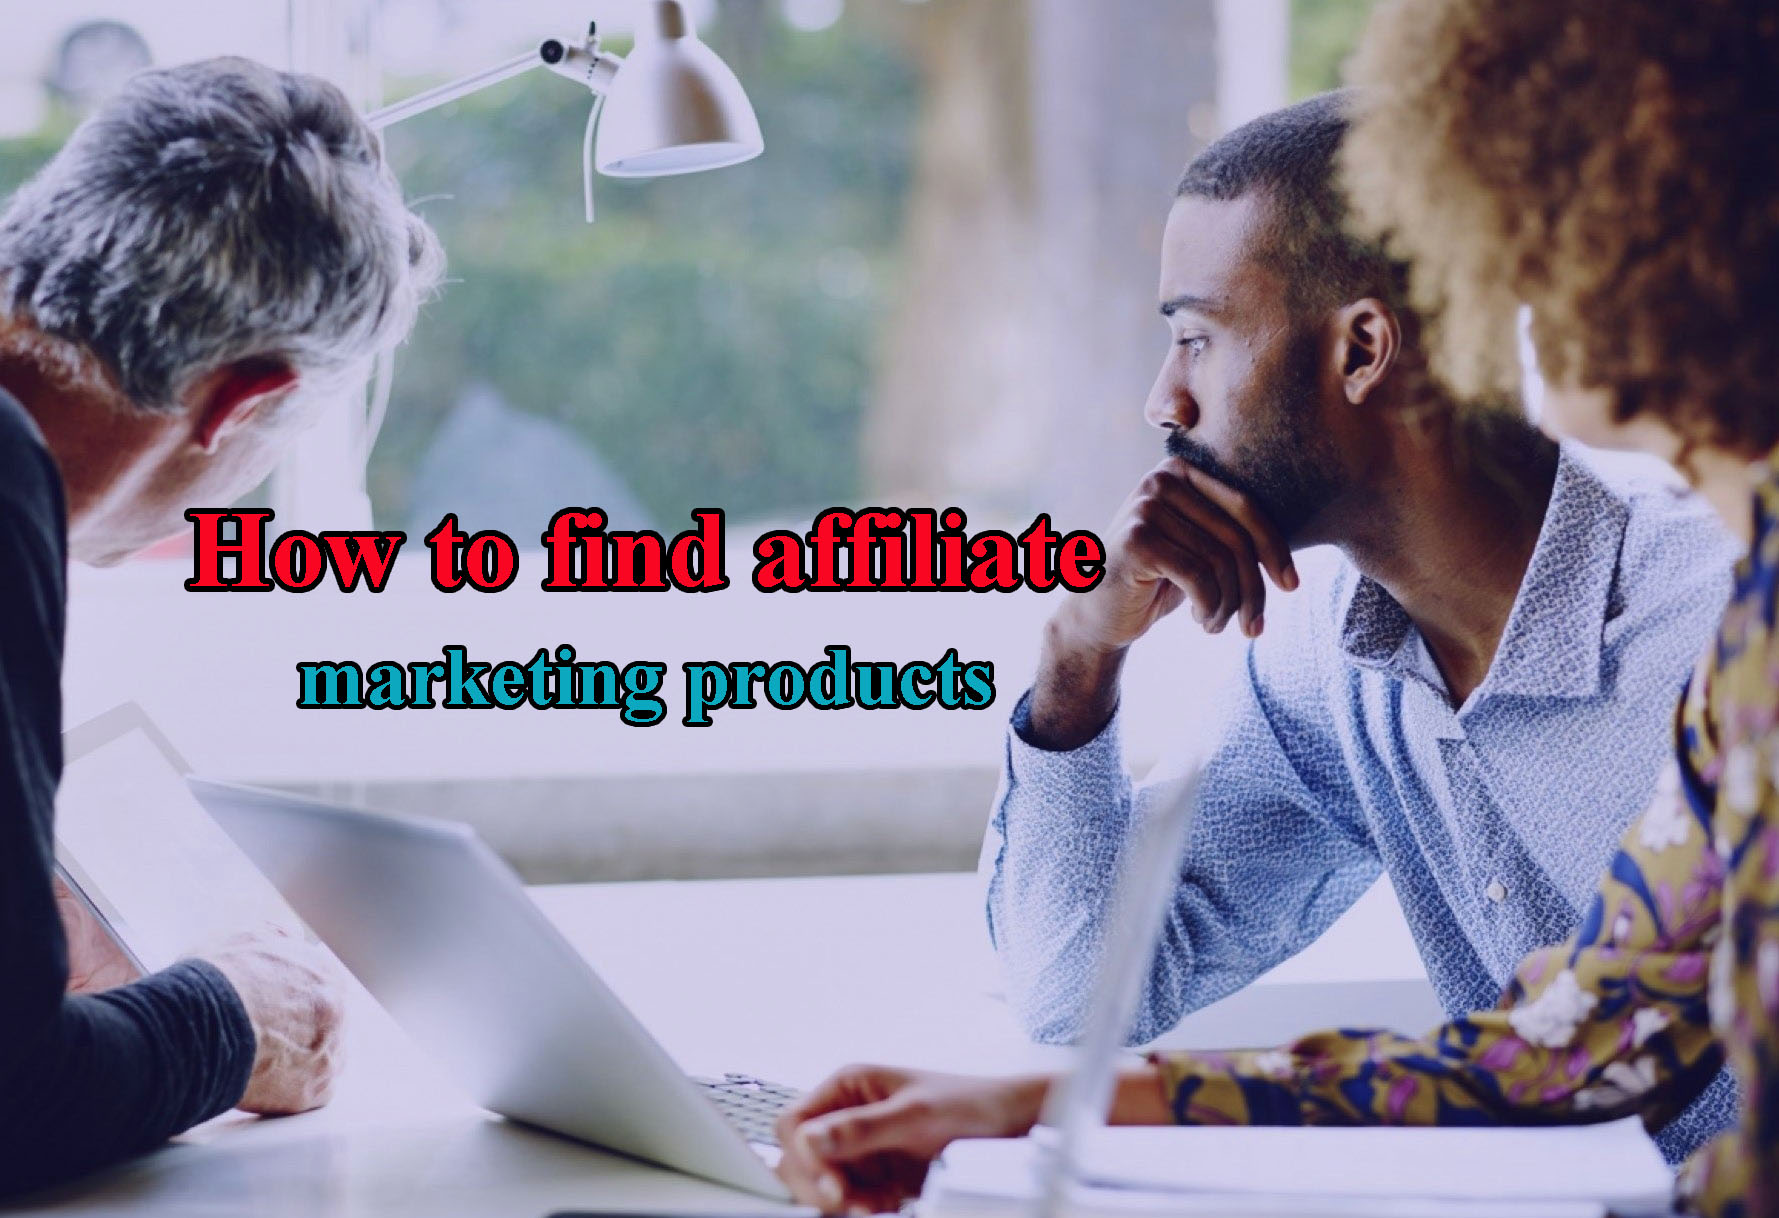 How to find affiliate marketing products